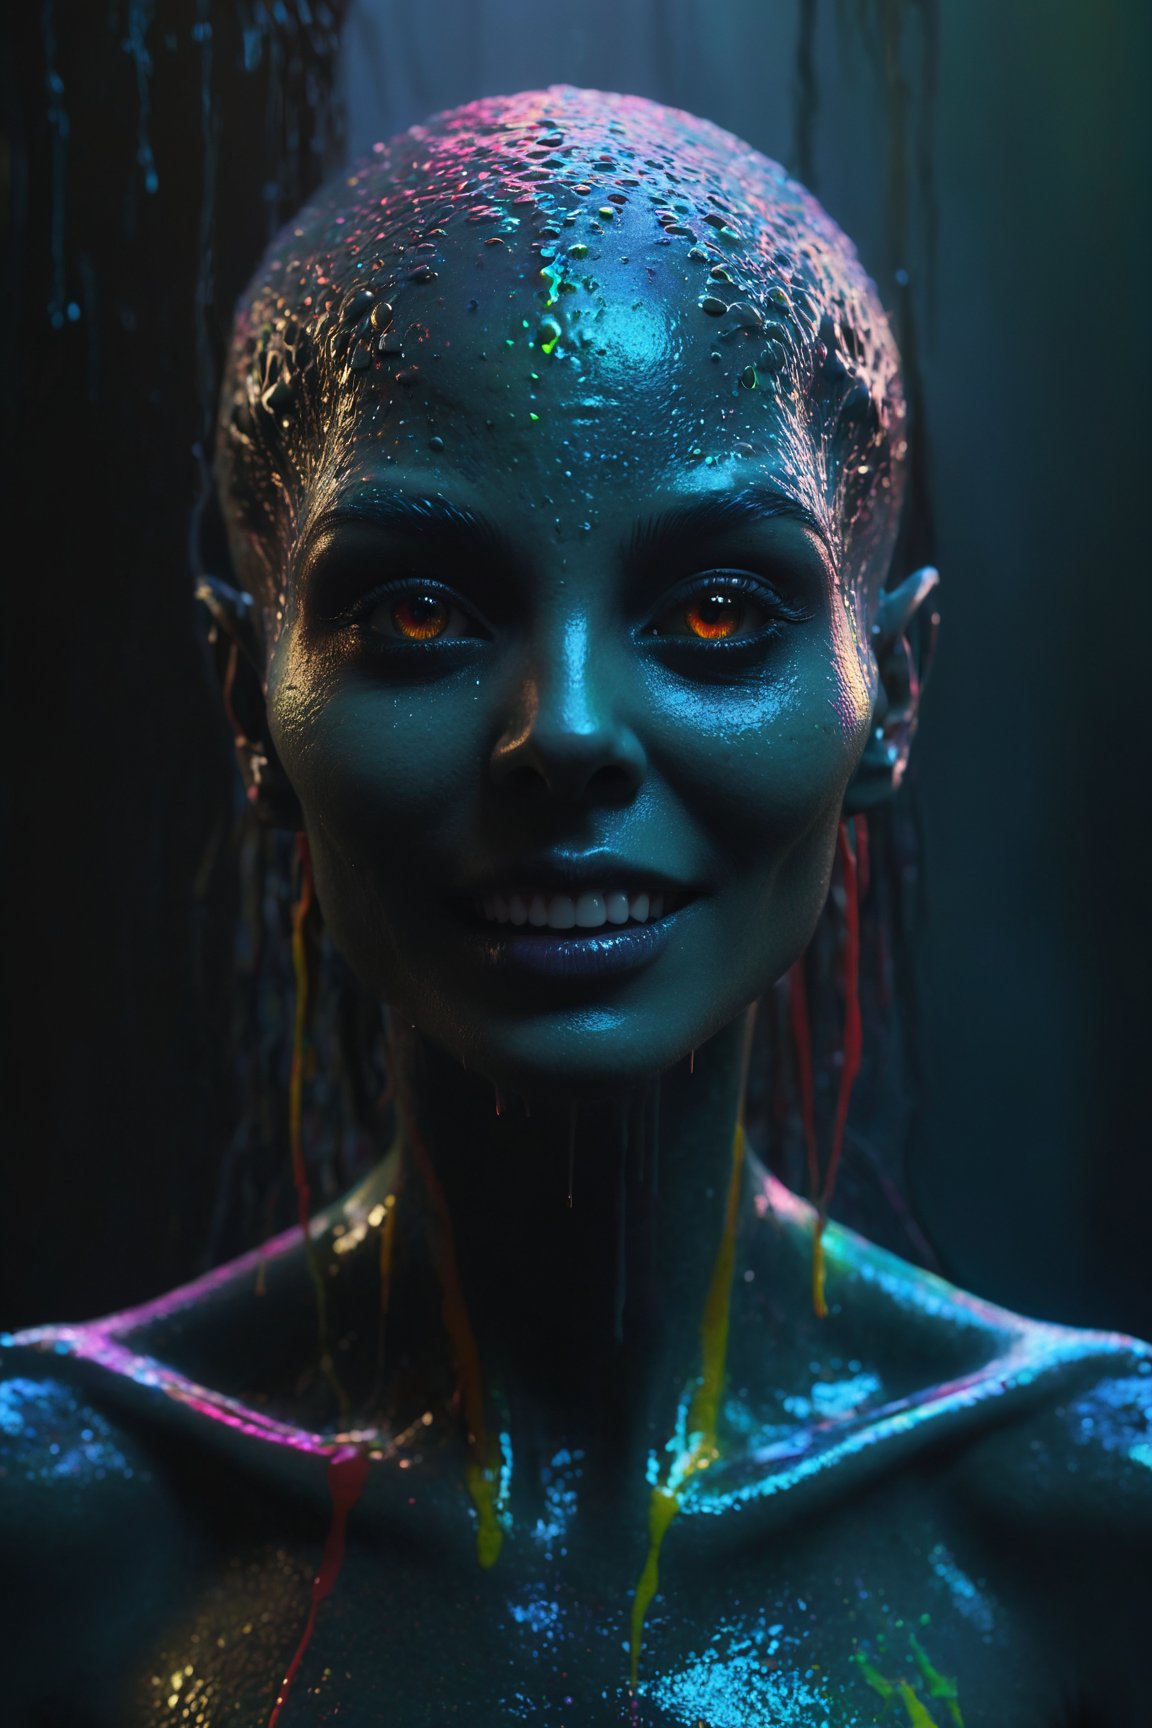 (Create a masterpiece of the highest quality) with an ((8K resolution)), showcasing an ((ultra-detailed and realistic)) portrait of an ((alien shapeshifter entity)). Focus on capturing the mesmerizing allure of its ((eyes)) and the intricate details of its facial features. Emphasize the ((otherworldly skin texture)) and craft an ((insane smile)) that radiates both unnerving complexity and mesmerizing charm. Set the scene in a surreal horror atmosphere, incorporating ((dark shadows)) and an ((inverted neon rainbow drip paint)) for an ethereal and captivating effect. Infuse the composition with a ((vibrant color palette)), vivid shading, and an ((ethereal glow)) that enhances the ((hypnotic energy)) of the entity. Strive for a transcendent beauty that exudes a mystical aura, all achieved through the advanced techniques of ((Octane render)).